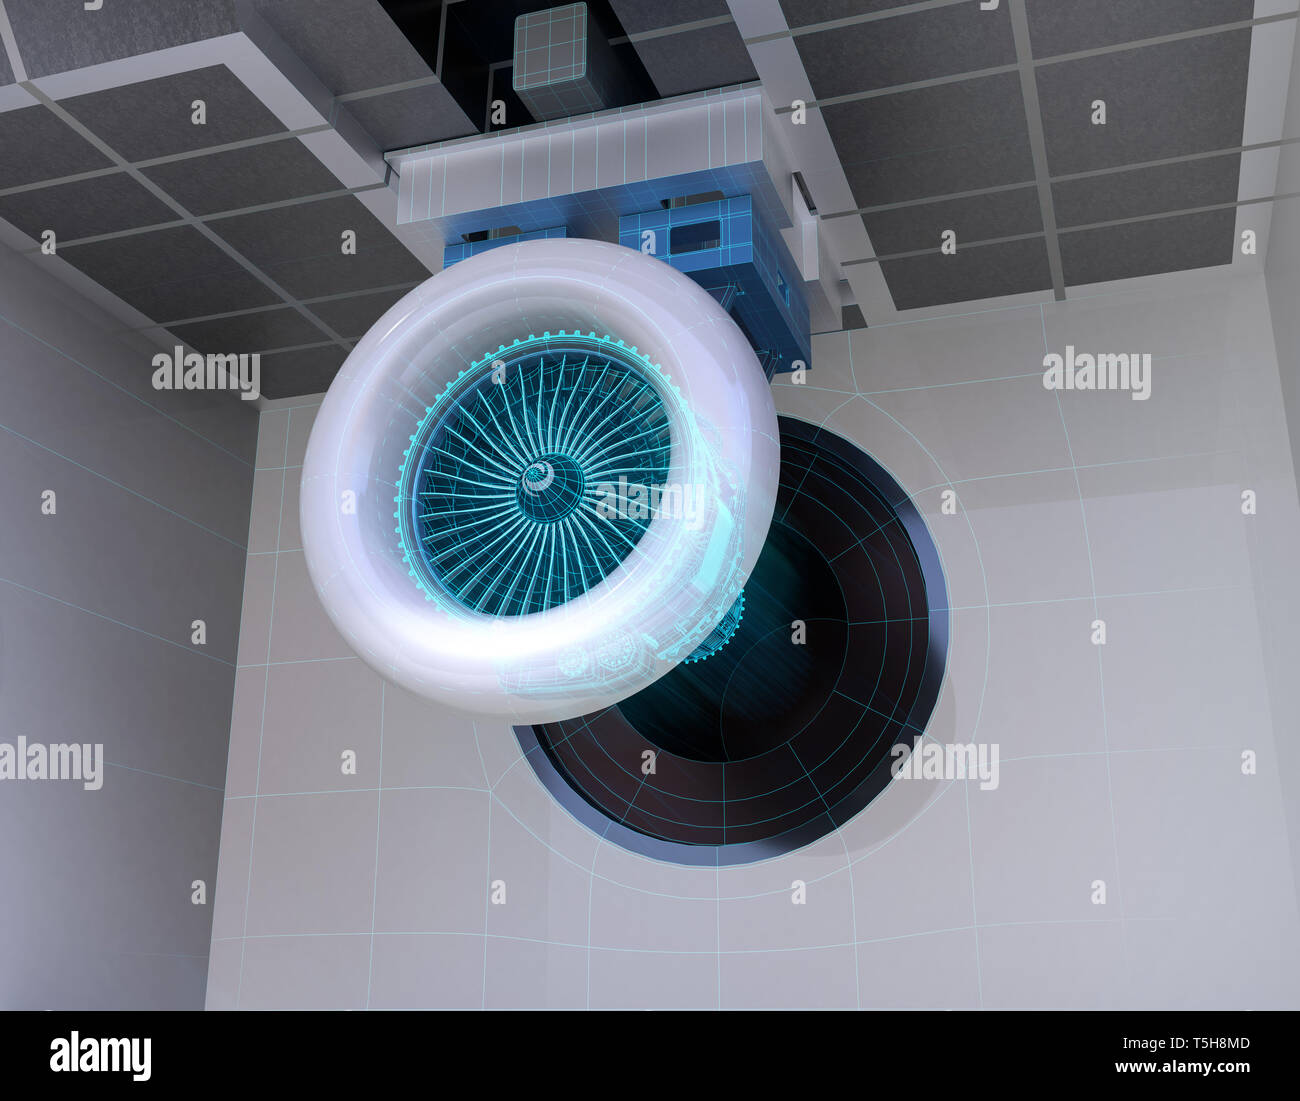 Wireframe rendering of aeroengine test cell. Digital twin concept. 3D rendering image. Stock Photo